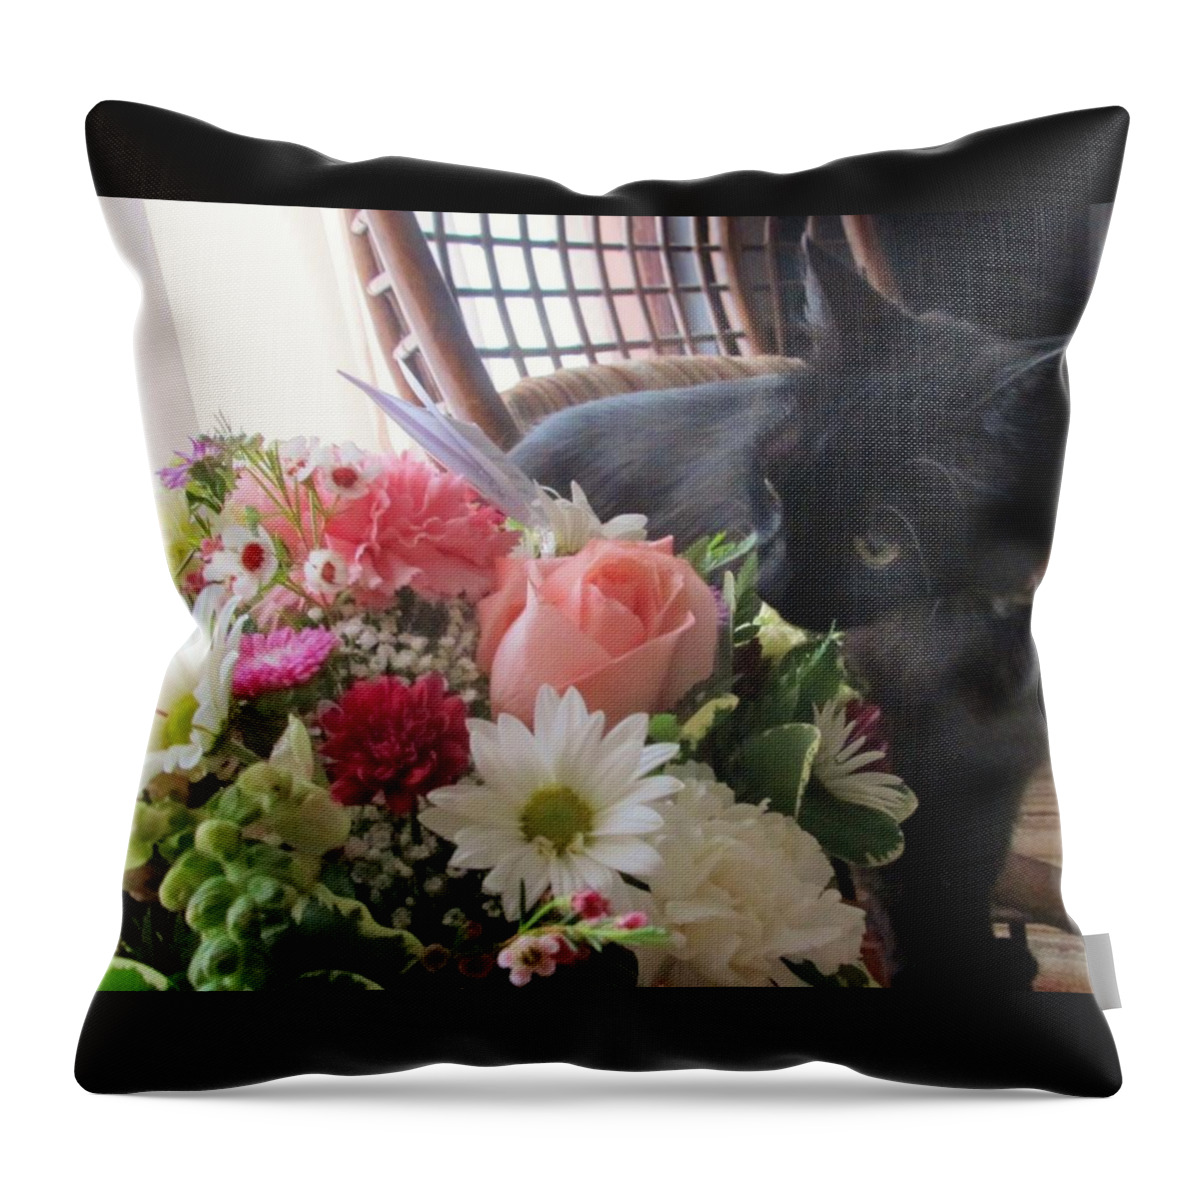 Roses Throw Pillow featuring the photograph Take Time to Smell The Roses by Deborah Lacoste